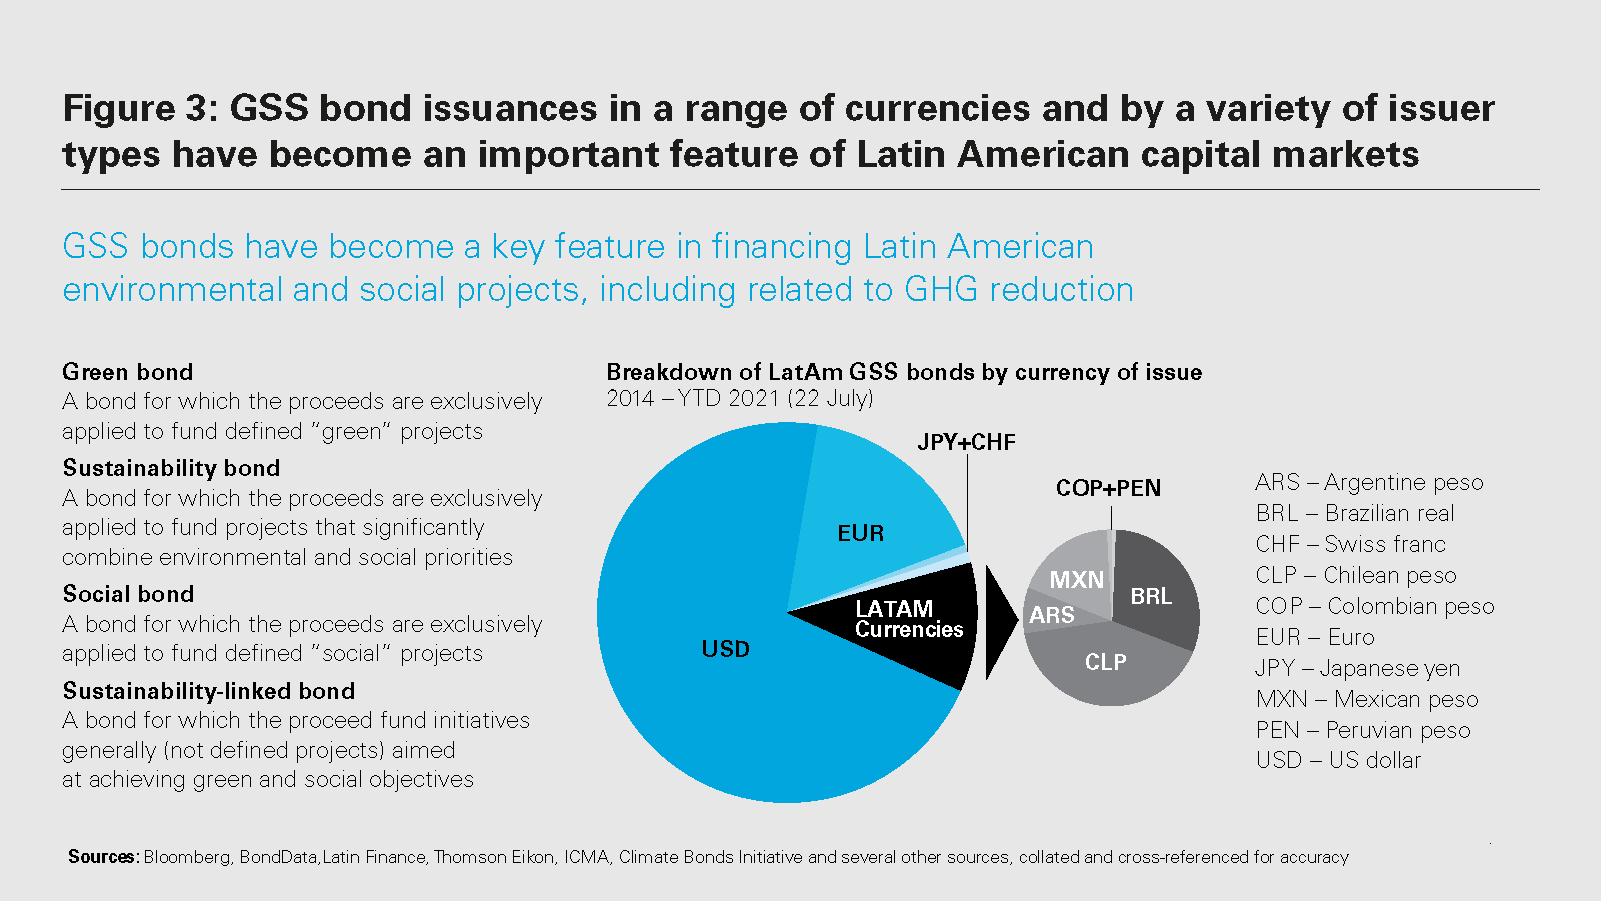 Figure 3: GSS bond issuances in a range of currencies and by a variety of issuer types have become an important feature of Latin American capital markets